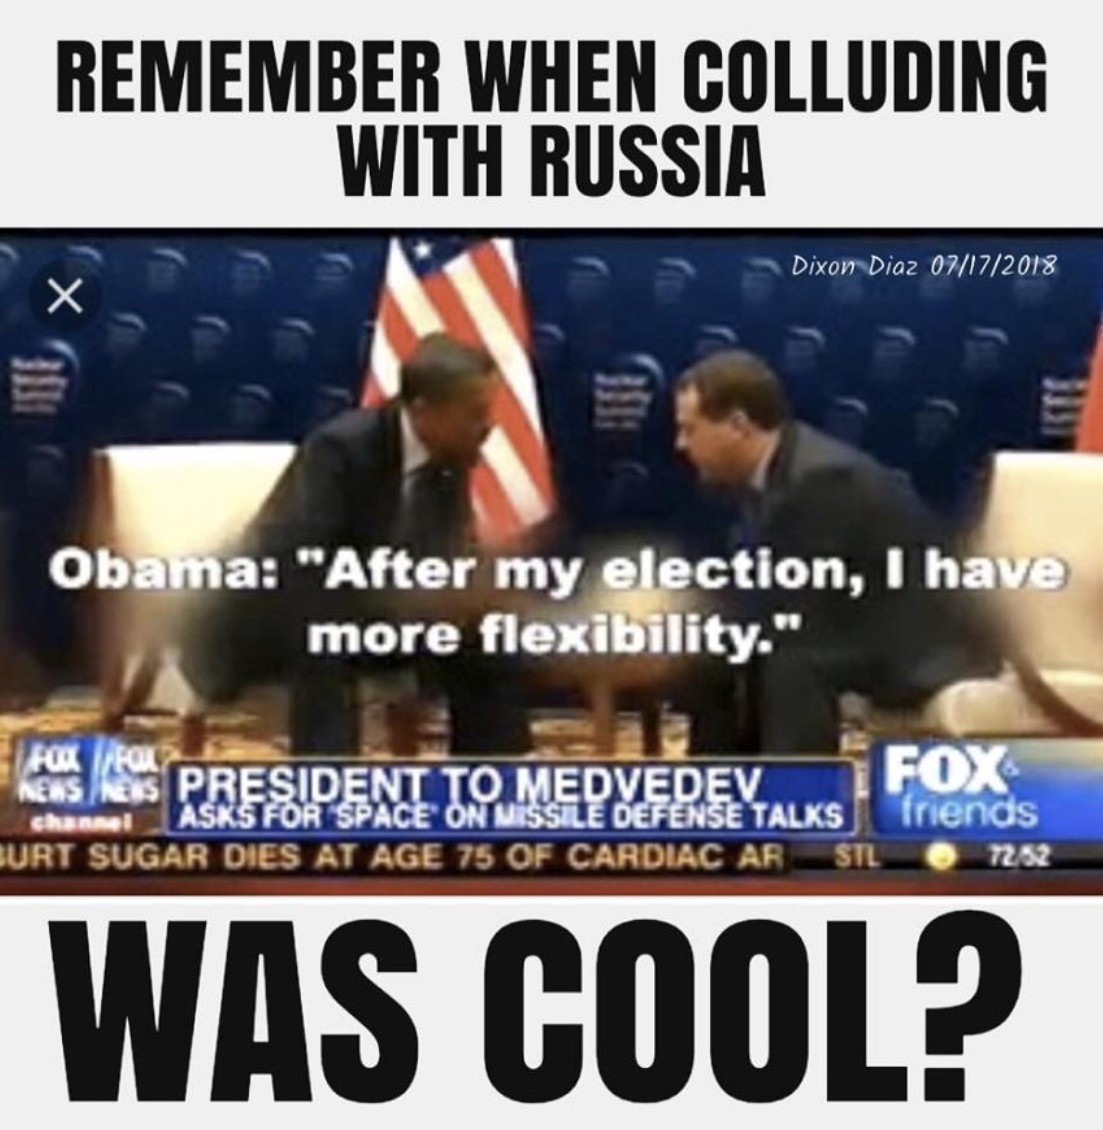 memes - news - Remember When Colluding With Russia Dixon Diaz 07172018 Obama "After my election, I have more flexibility." President To Medvedev Asks For Space On Misste Defense Talks Burt Sugar Dies At Age 75 Of Cardiac Ar i Fun Nas channel Fo Triends To